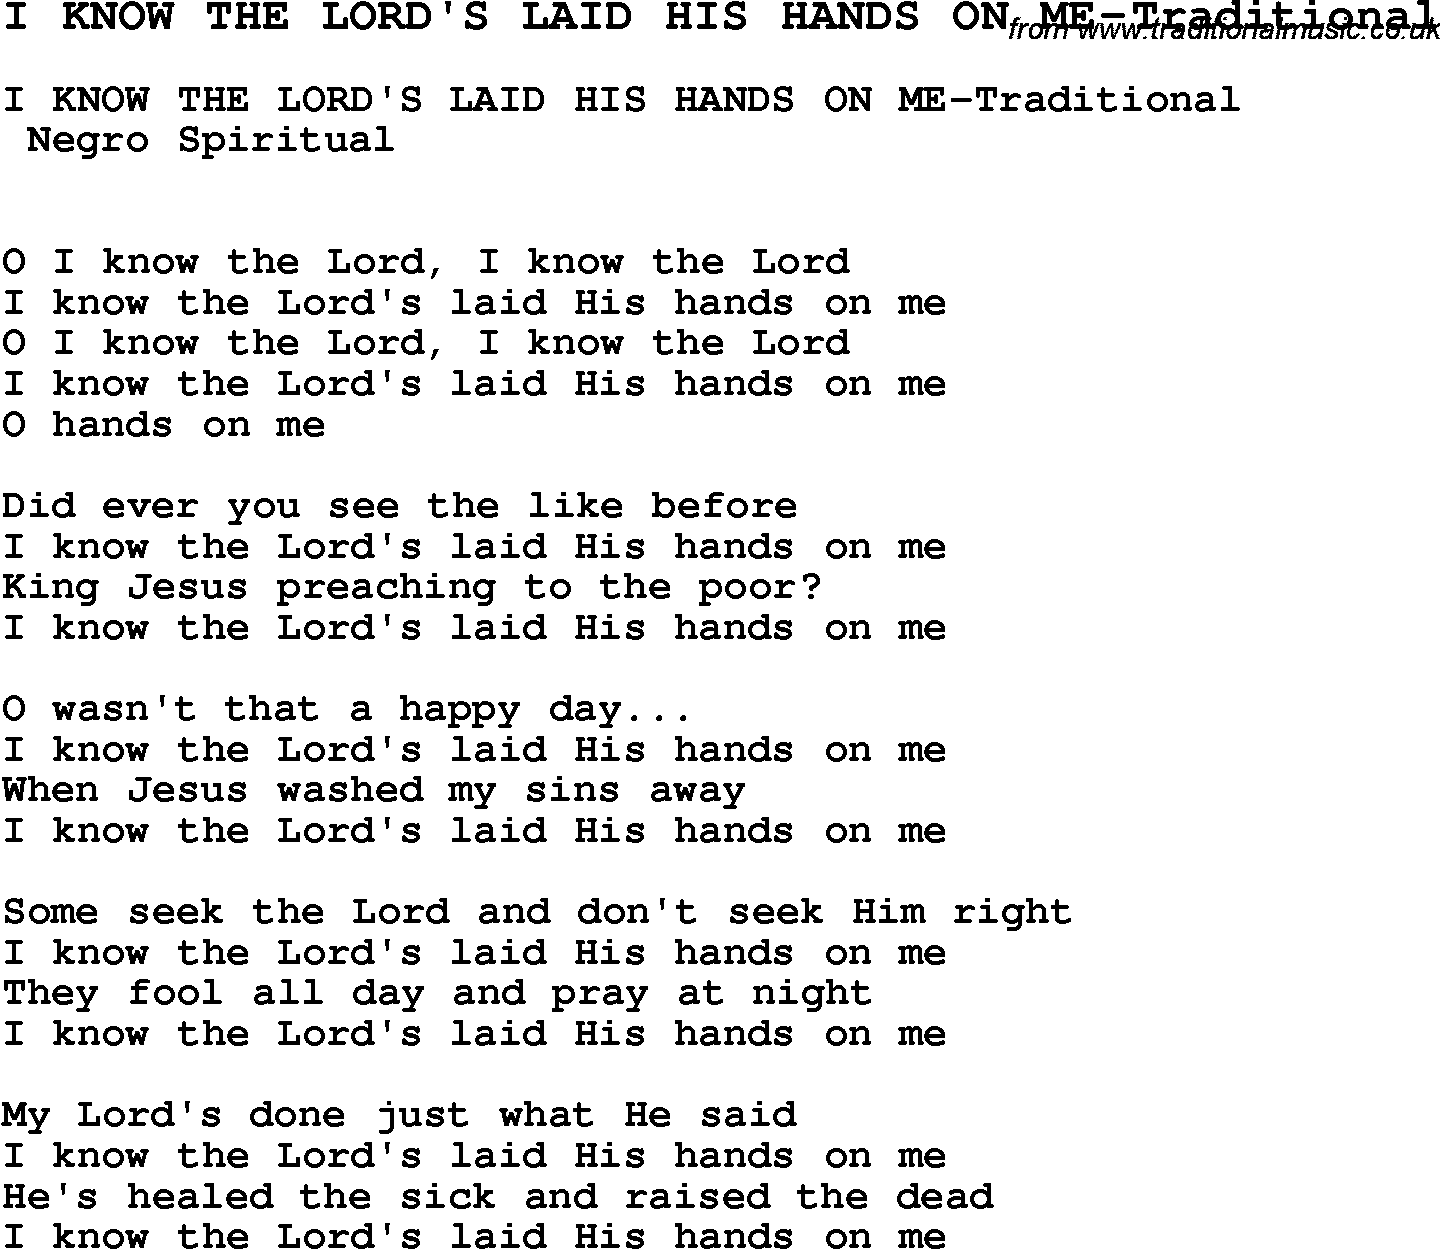 Skiffle Song Lyrics for I Know The Lord's Laid His Hands On Me-Traditional.